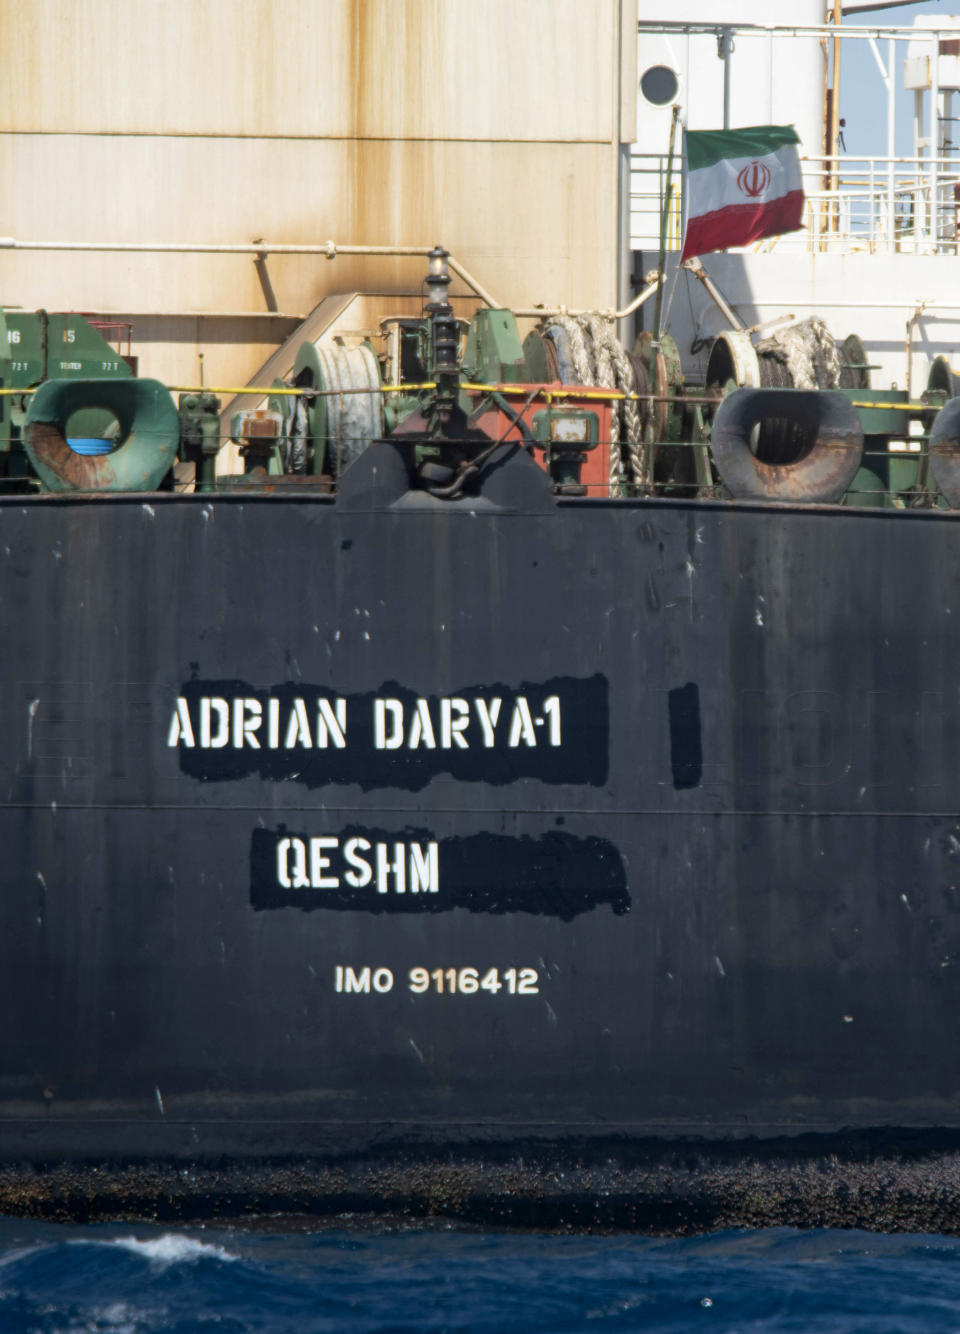 Renamed Adrian Aryra 1 super tanker hosting an Iranian flag, sails in the the waters of the British territory of Gibraltar, Sunday, Aug. 18, 2019. Authorities in Gibraltar on Sunday rejected the United States' latest request not to release a seized Iranian supertanker, clearing the way for the vessel to set sail after being detained last month for allegedly attempting to breach European Union sanctions on Syria. (AP Photo/Marcos Moreno)